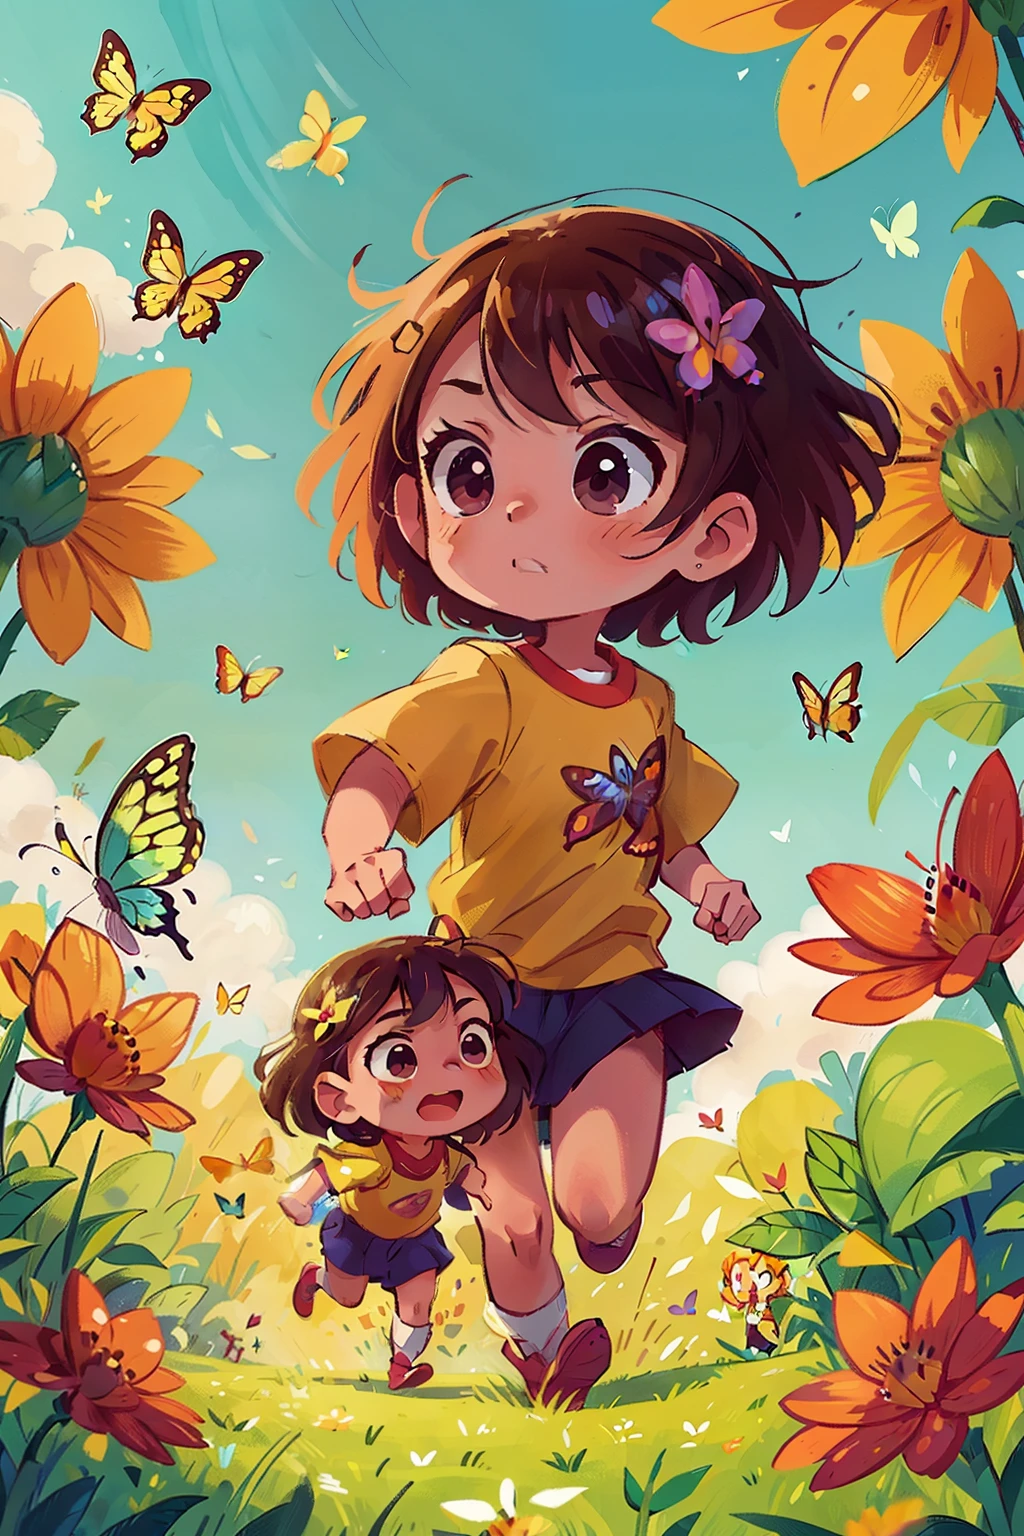 Generates an image of two  very young girl running happily in a flowery field, surrounded by butterflies of various shades of color